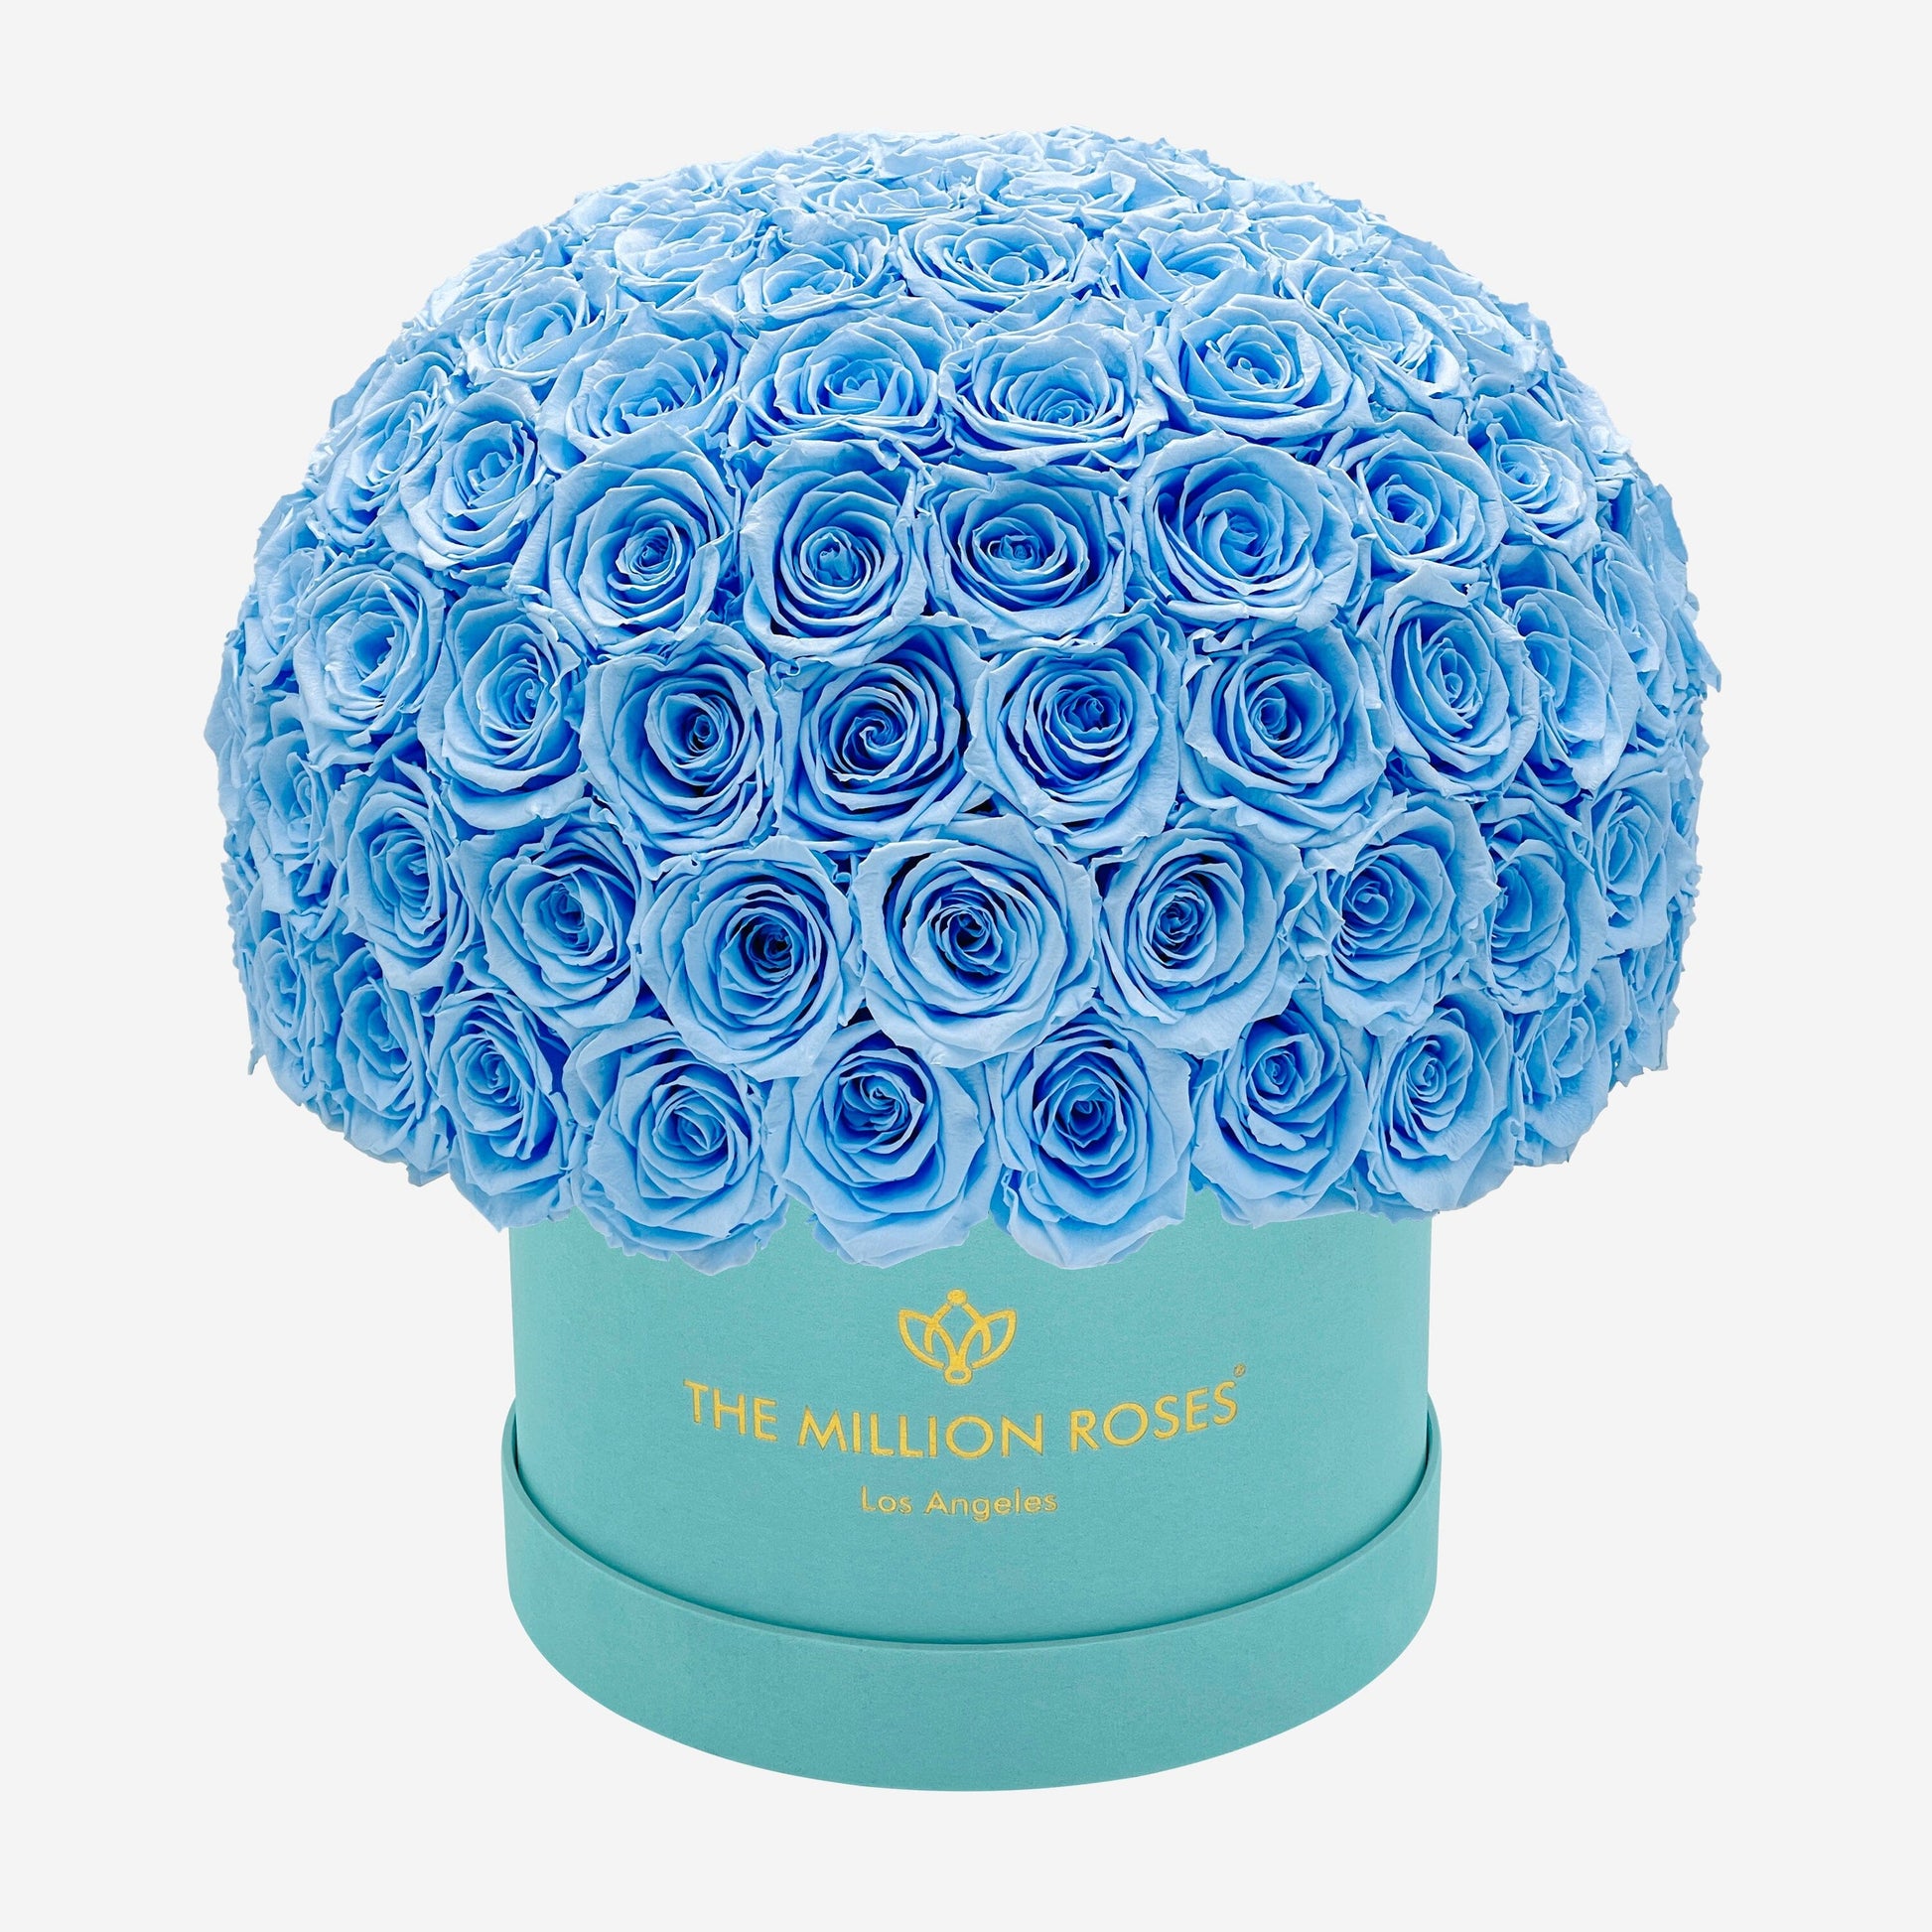 Supreme Mint Green Suede Superdome Box | Light Blue Roses - The Million Roses